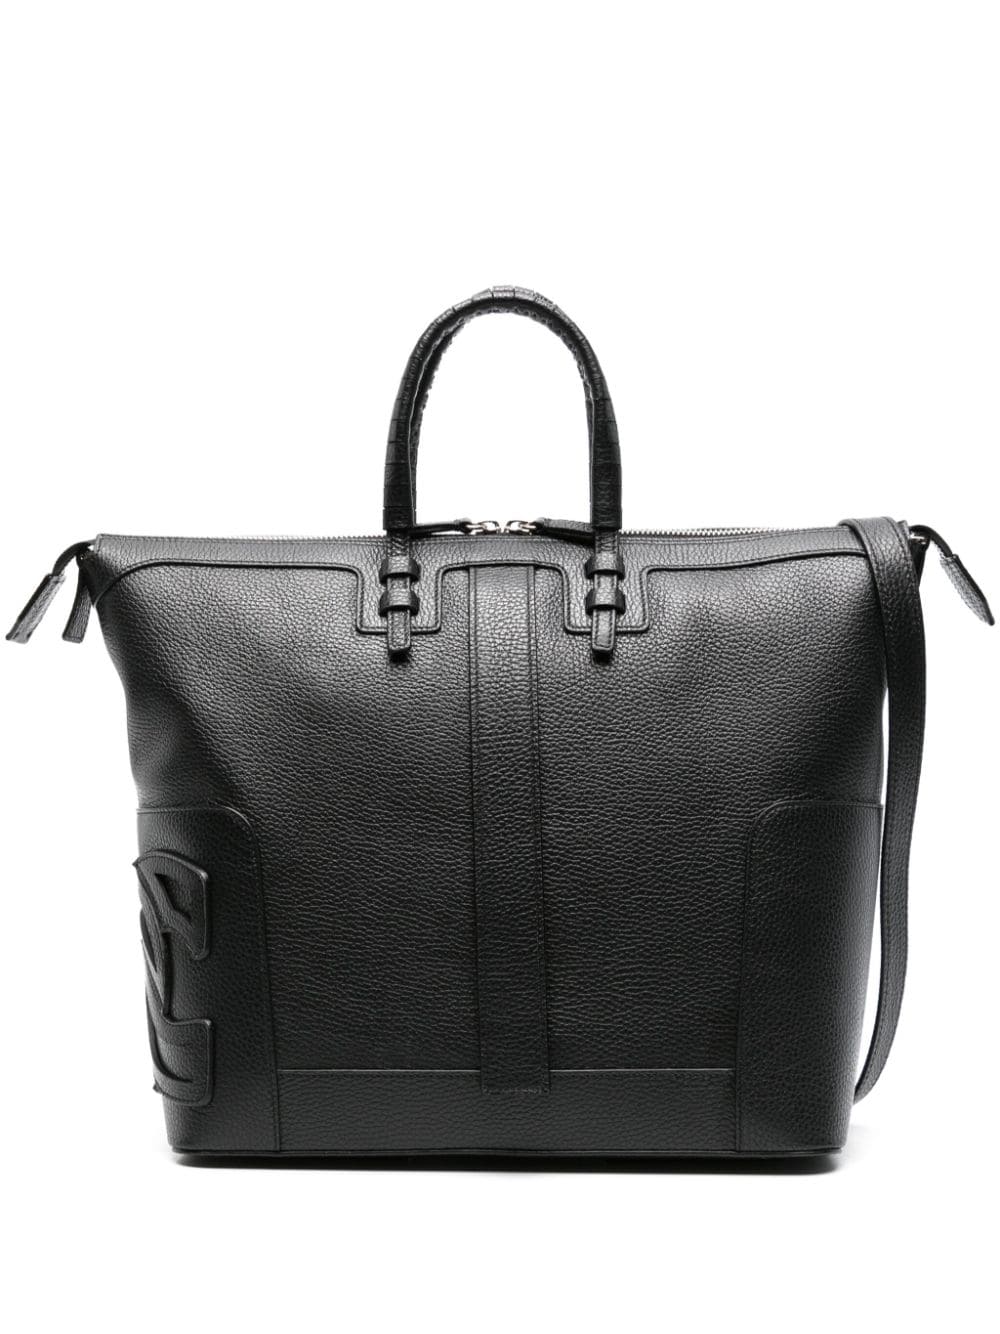 Image 1 of Casadei C-Style leather tote bag